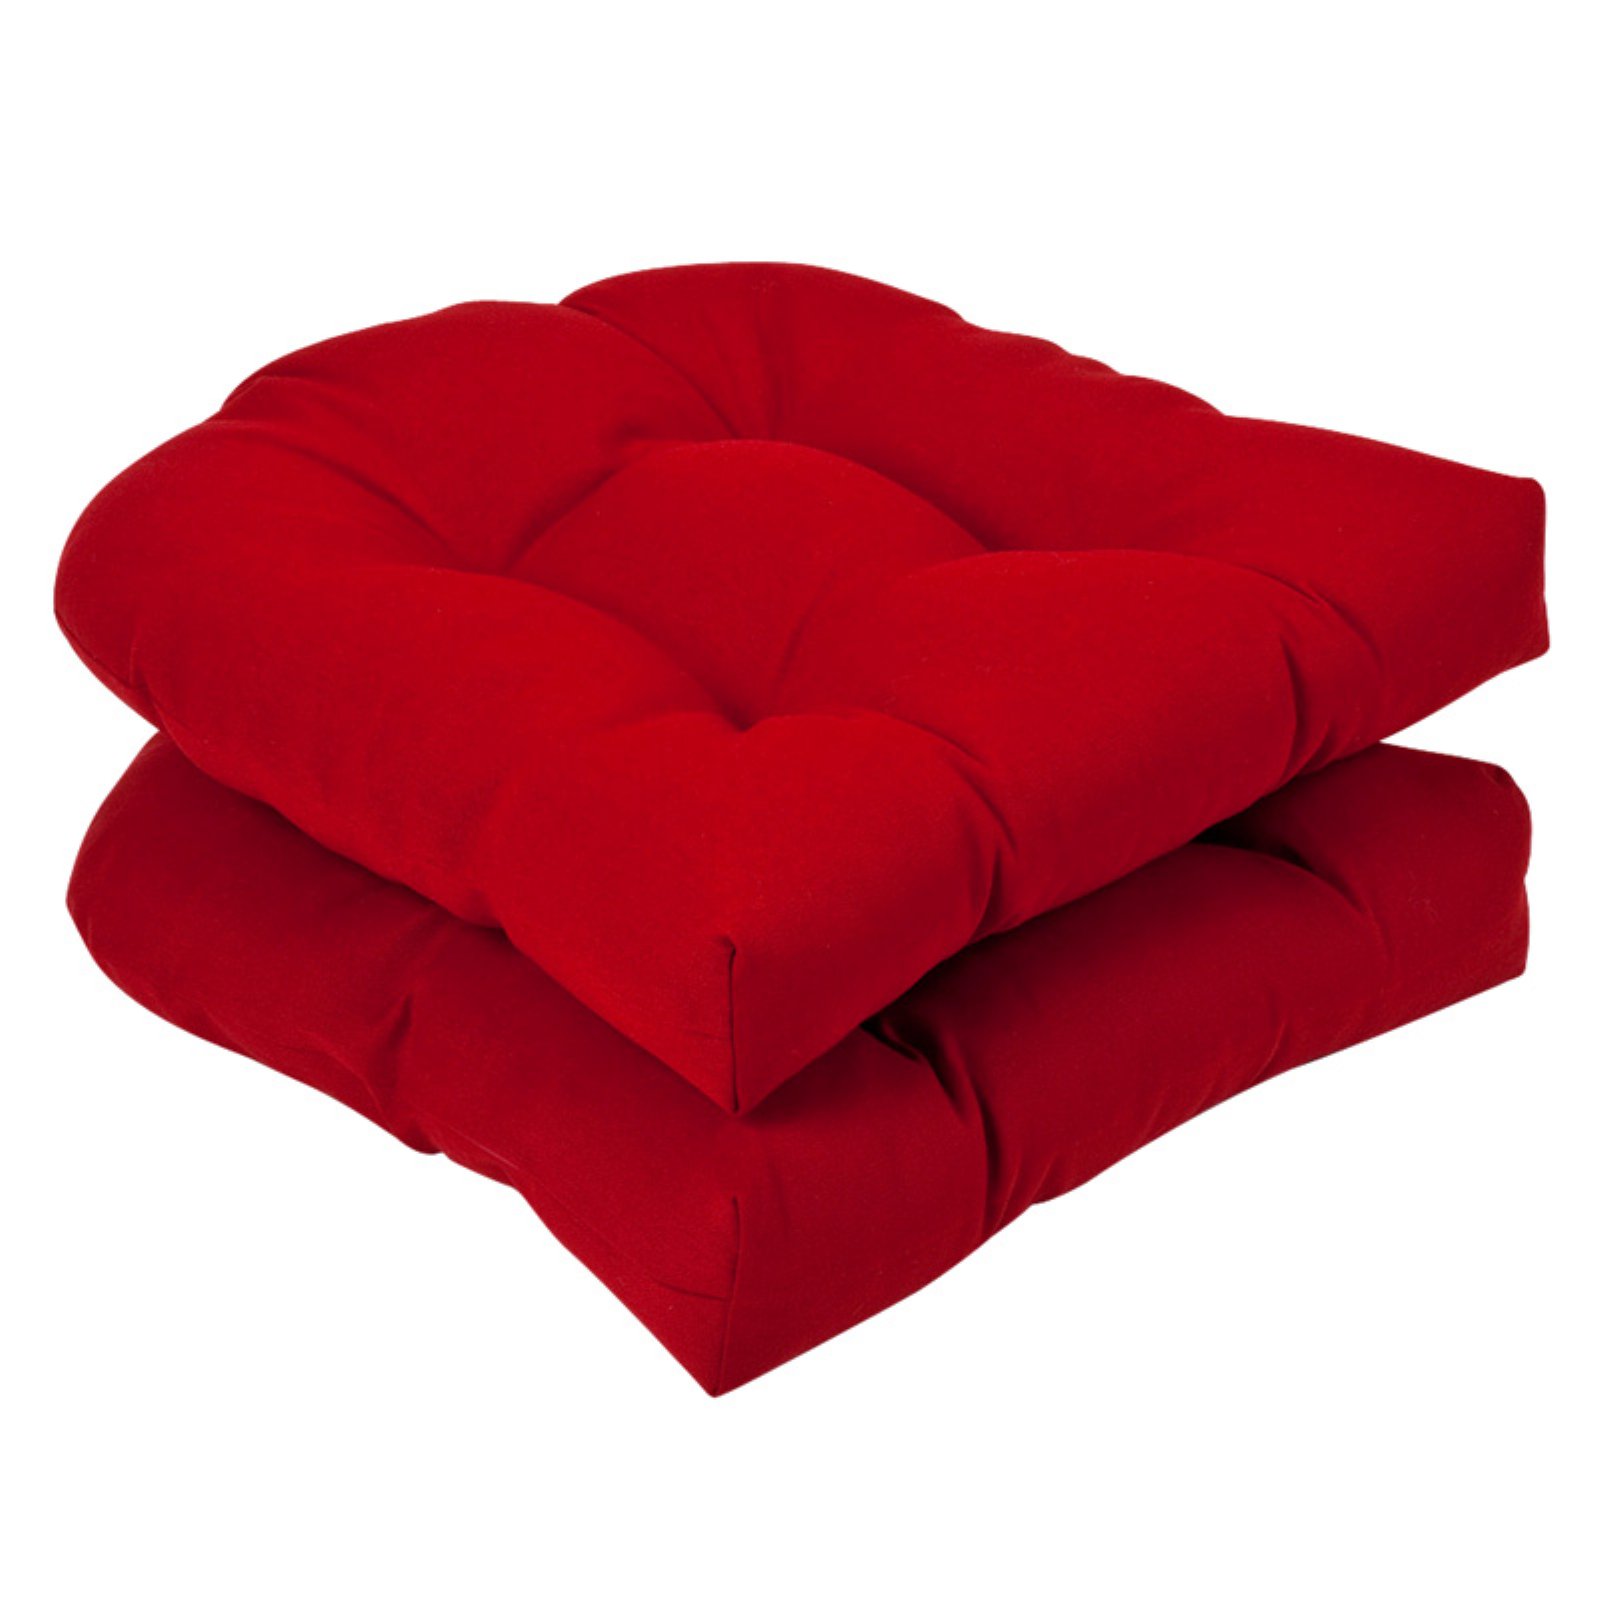 Pillow Perfect Outdoor/Indoor Pompeii Tufted Seat Cushions (Round Back), 19" x 19", Red, 2 Pack - image 1 of 2